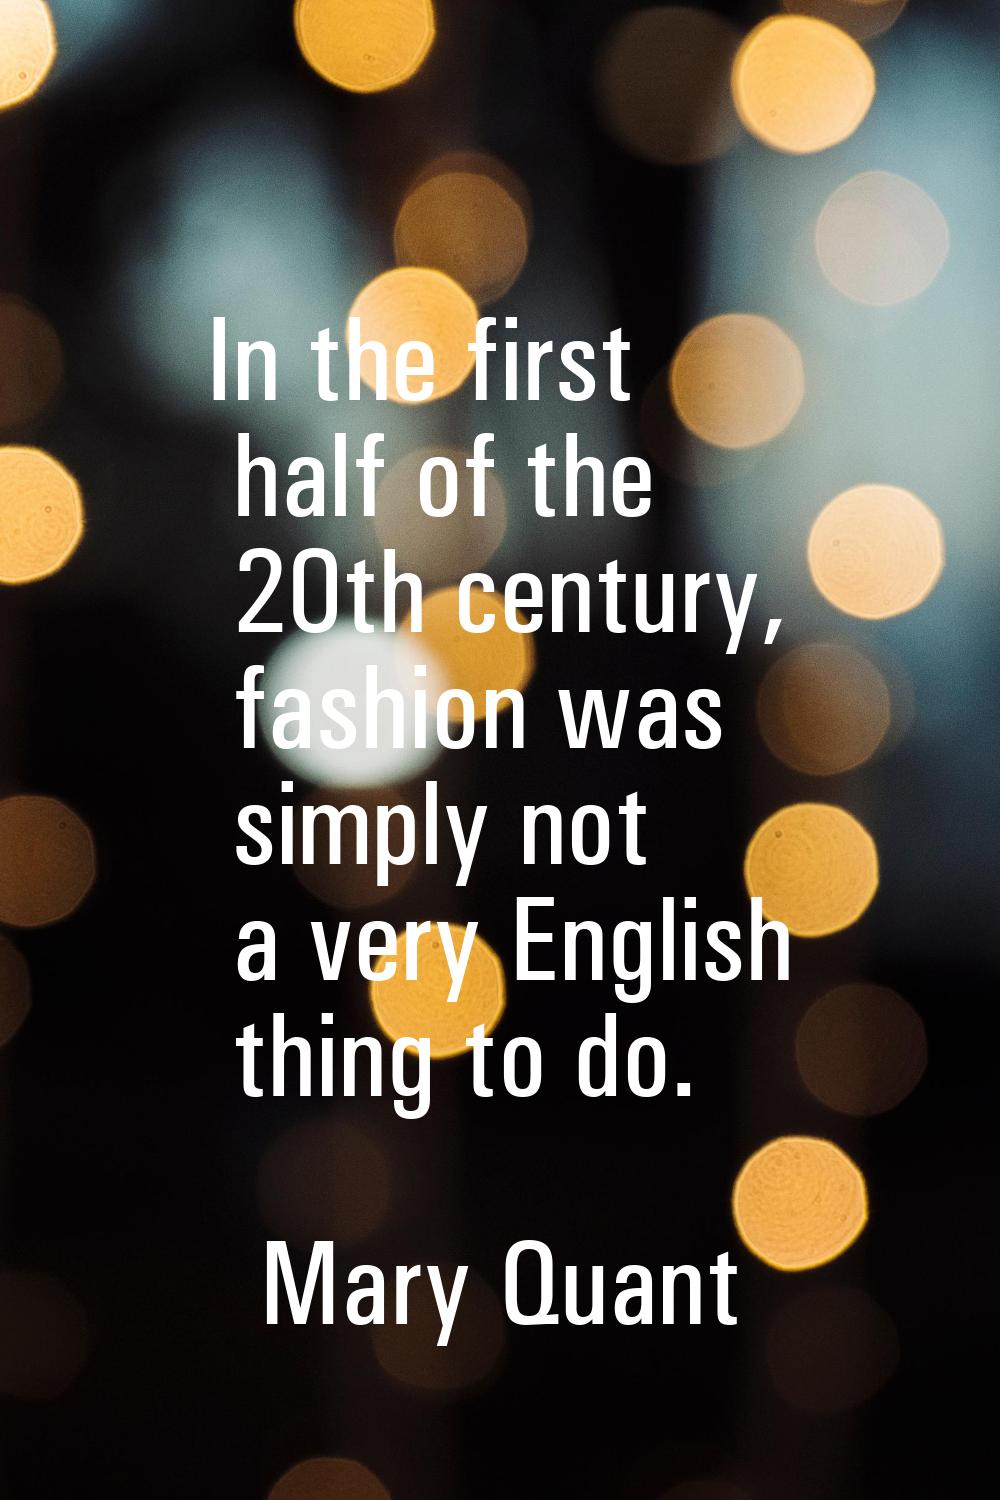 In the first half of the 20th century, fashion was simply not a very English thing to do.